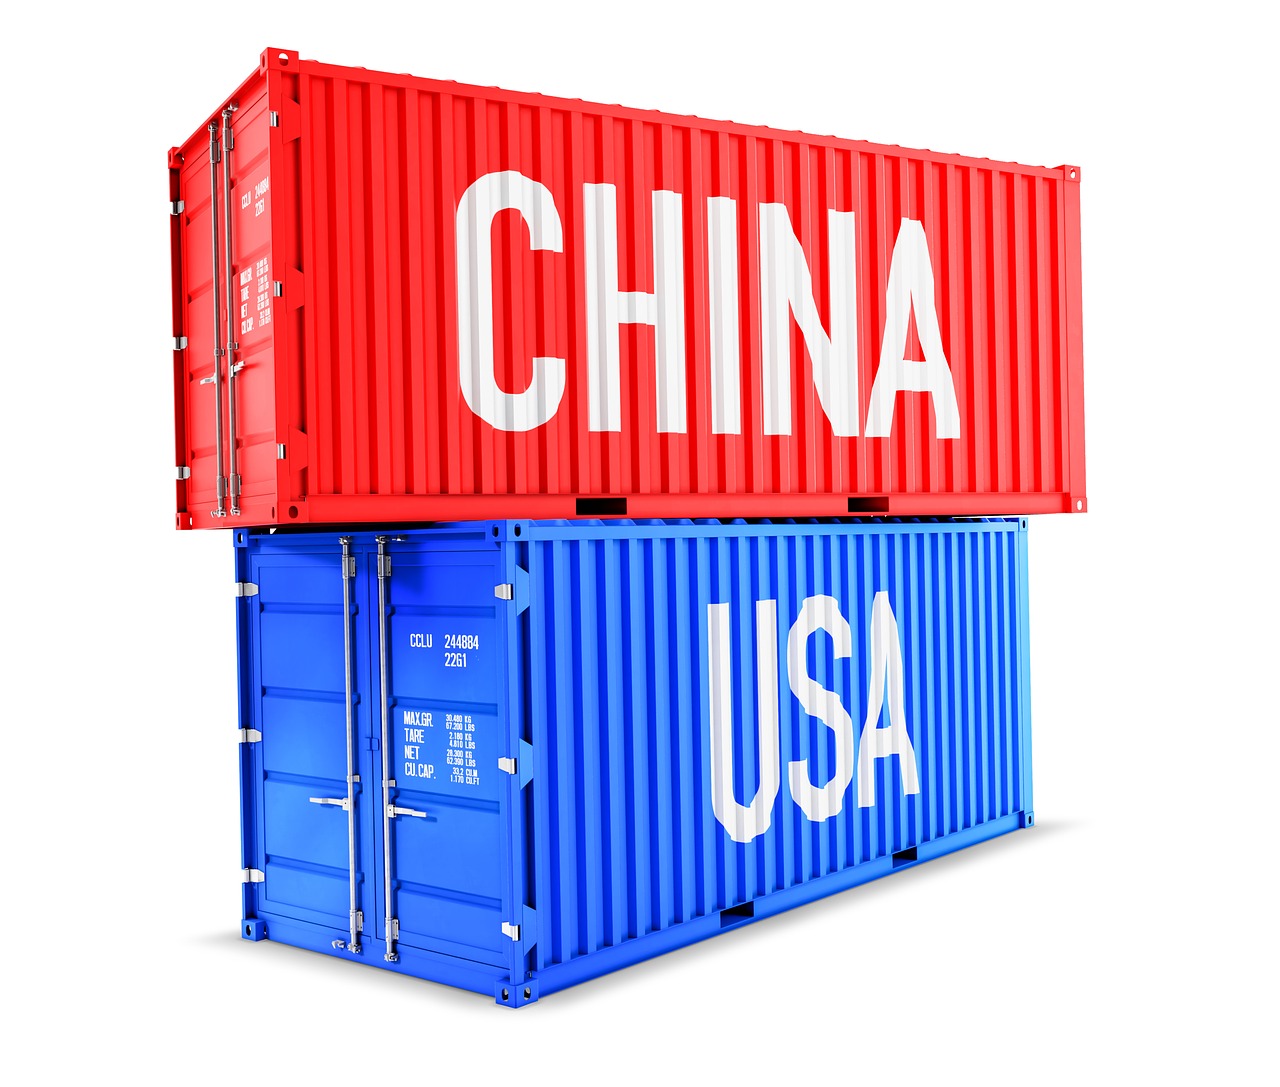 Worries about trade wars escalated last week as the Trump administration announced another possible $200 Billion in Chinese import tariffs.